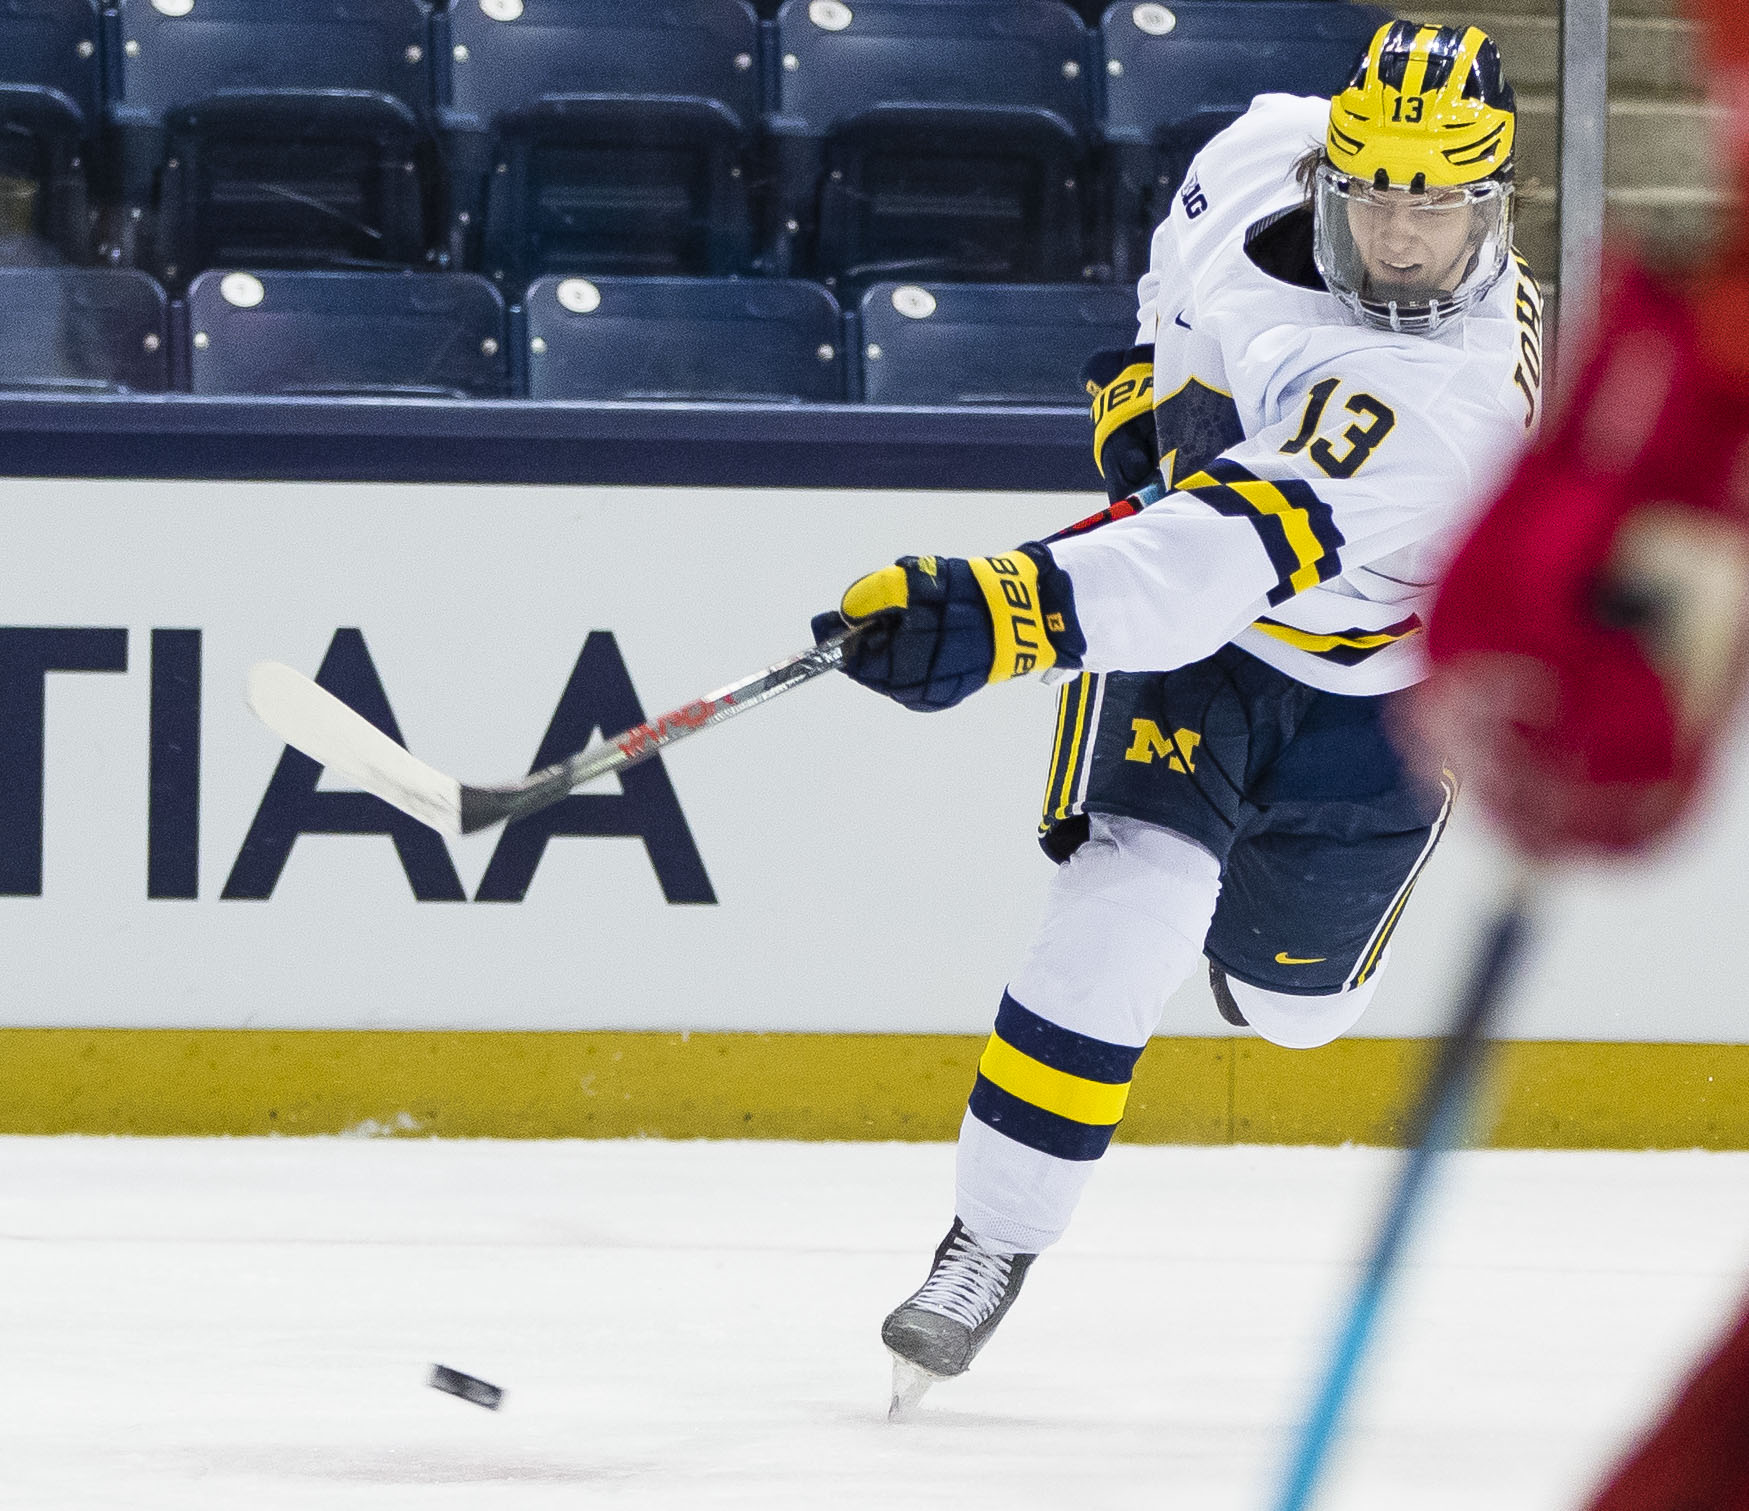 Michigan’s Kent Johnson (13) shoots during the Michigan vs. Ohio State Big Ten Hockey Tournament game Sunday, March 14, 2021 at the Compton Family Ice Arena in South Bend.